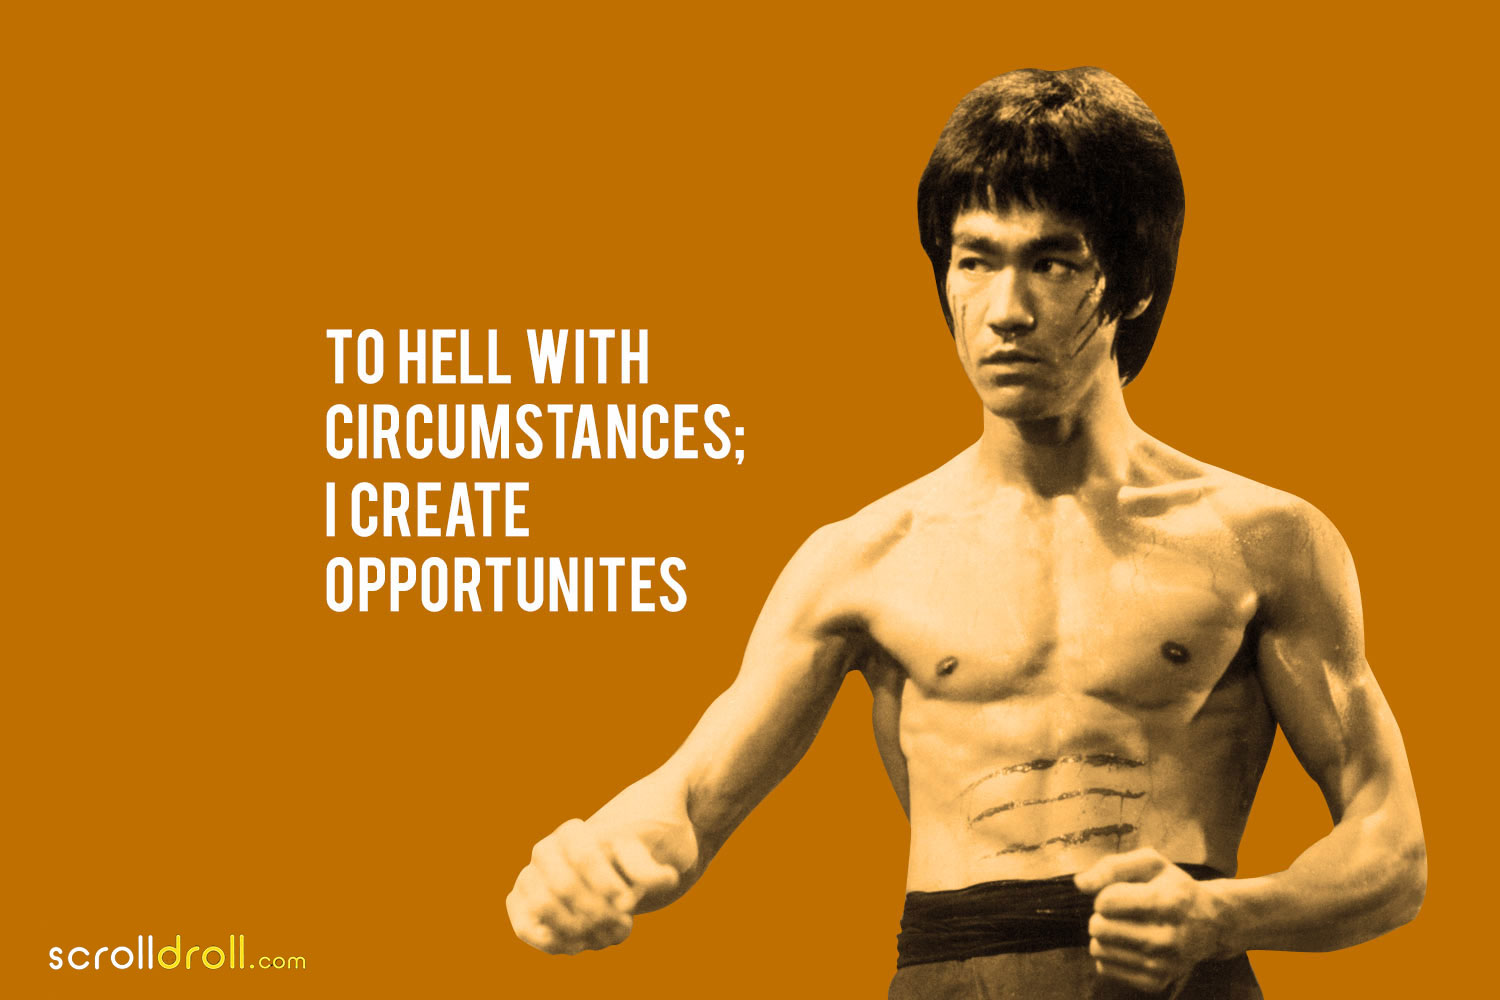 17 Bruce Lee Quotes That Will Inspire You To Achieve More